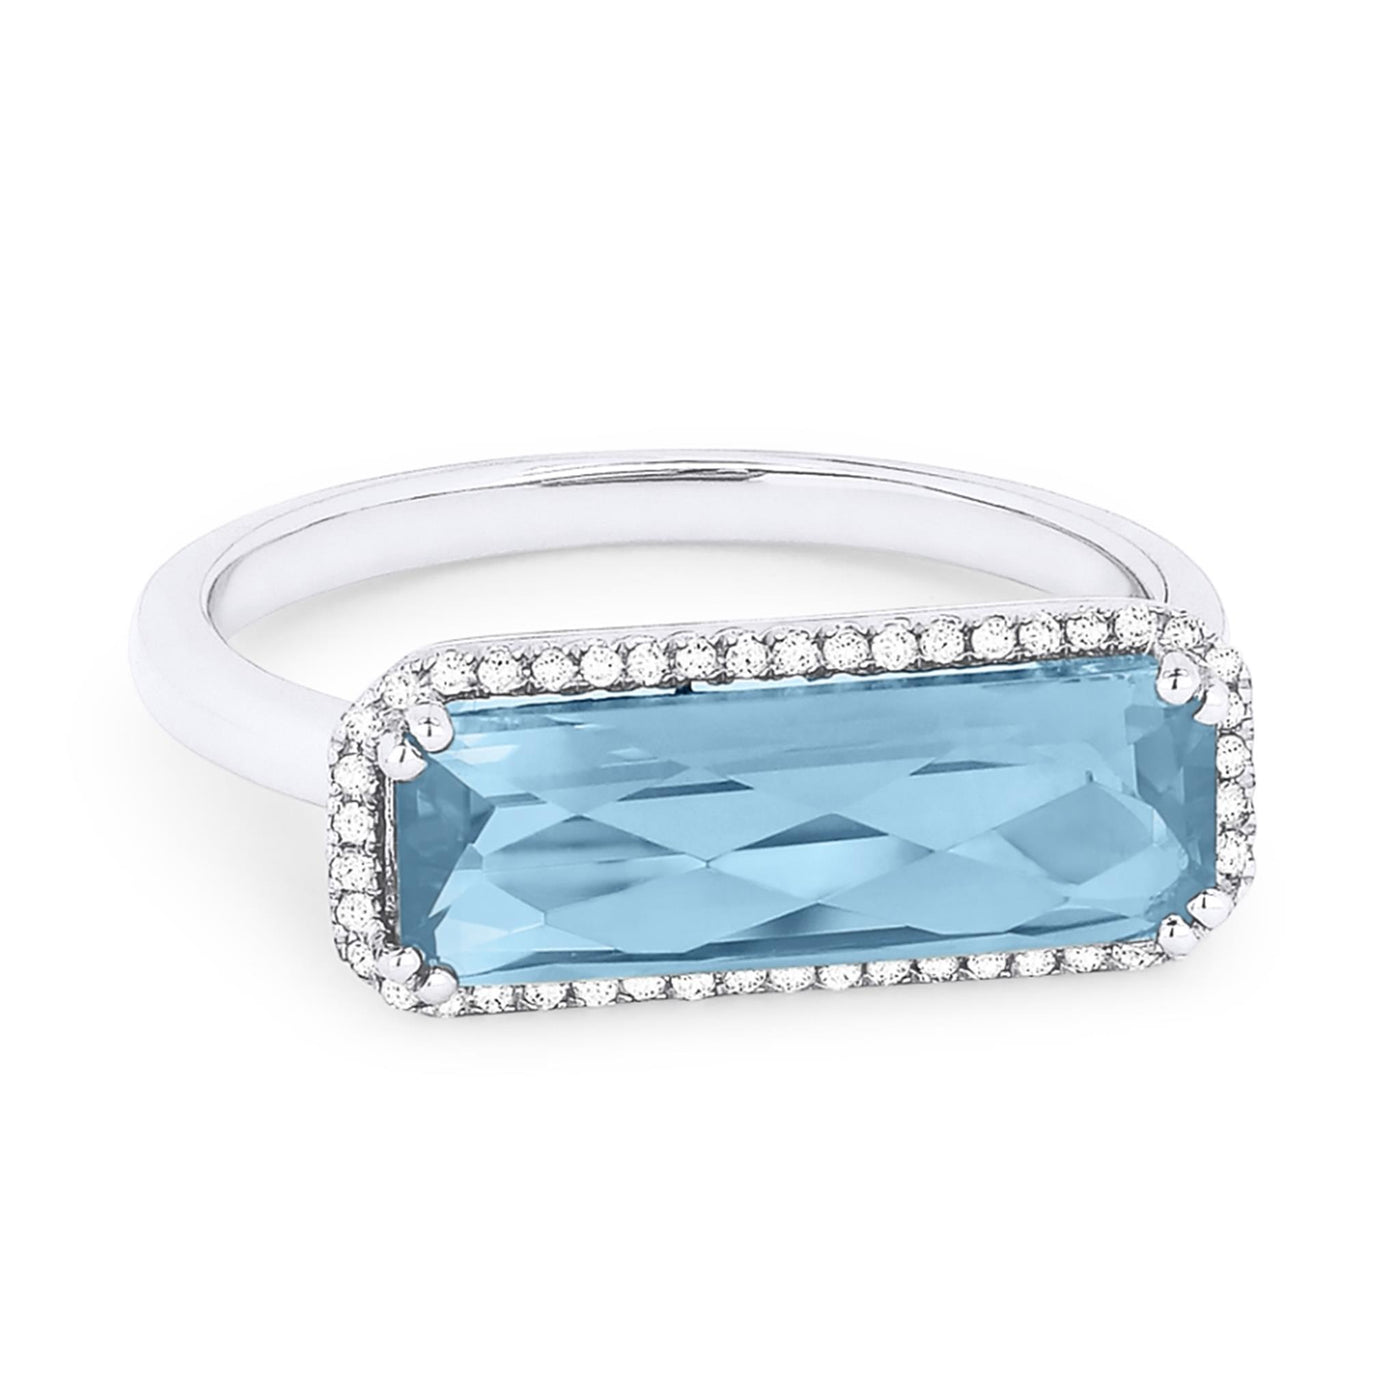 Madison L 14K White Gold 3.16ctw Halo Style Blue Topaz and Diamonds Ring